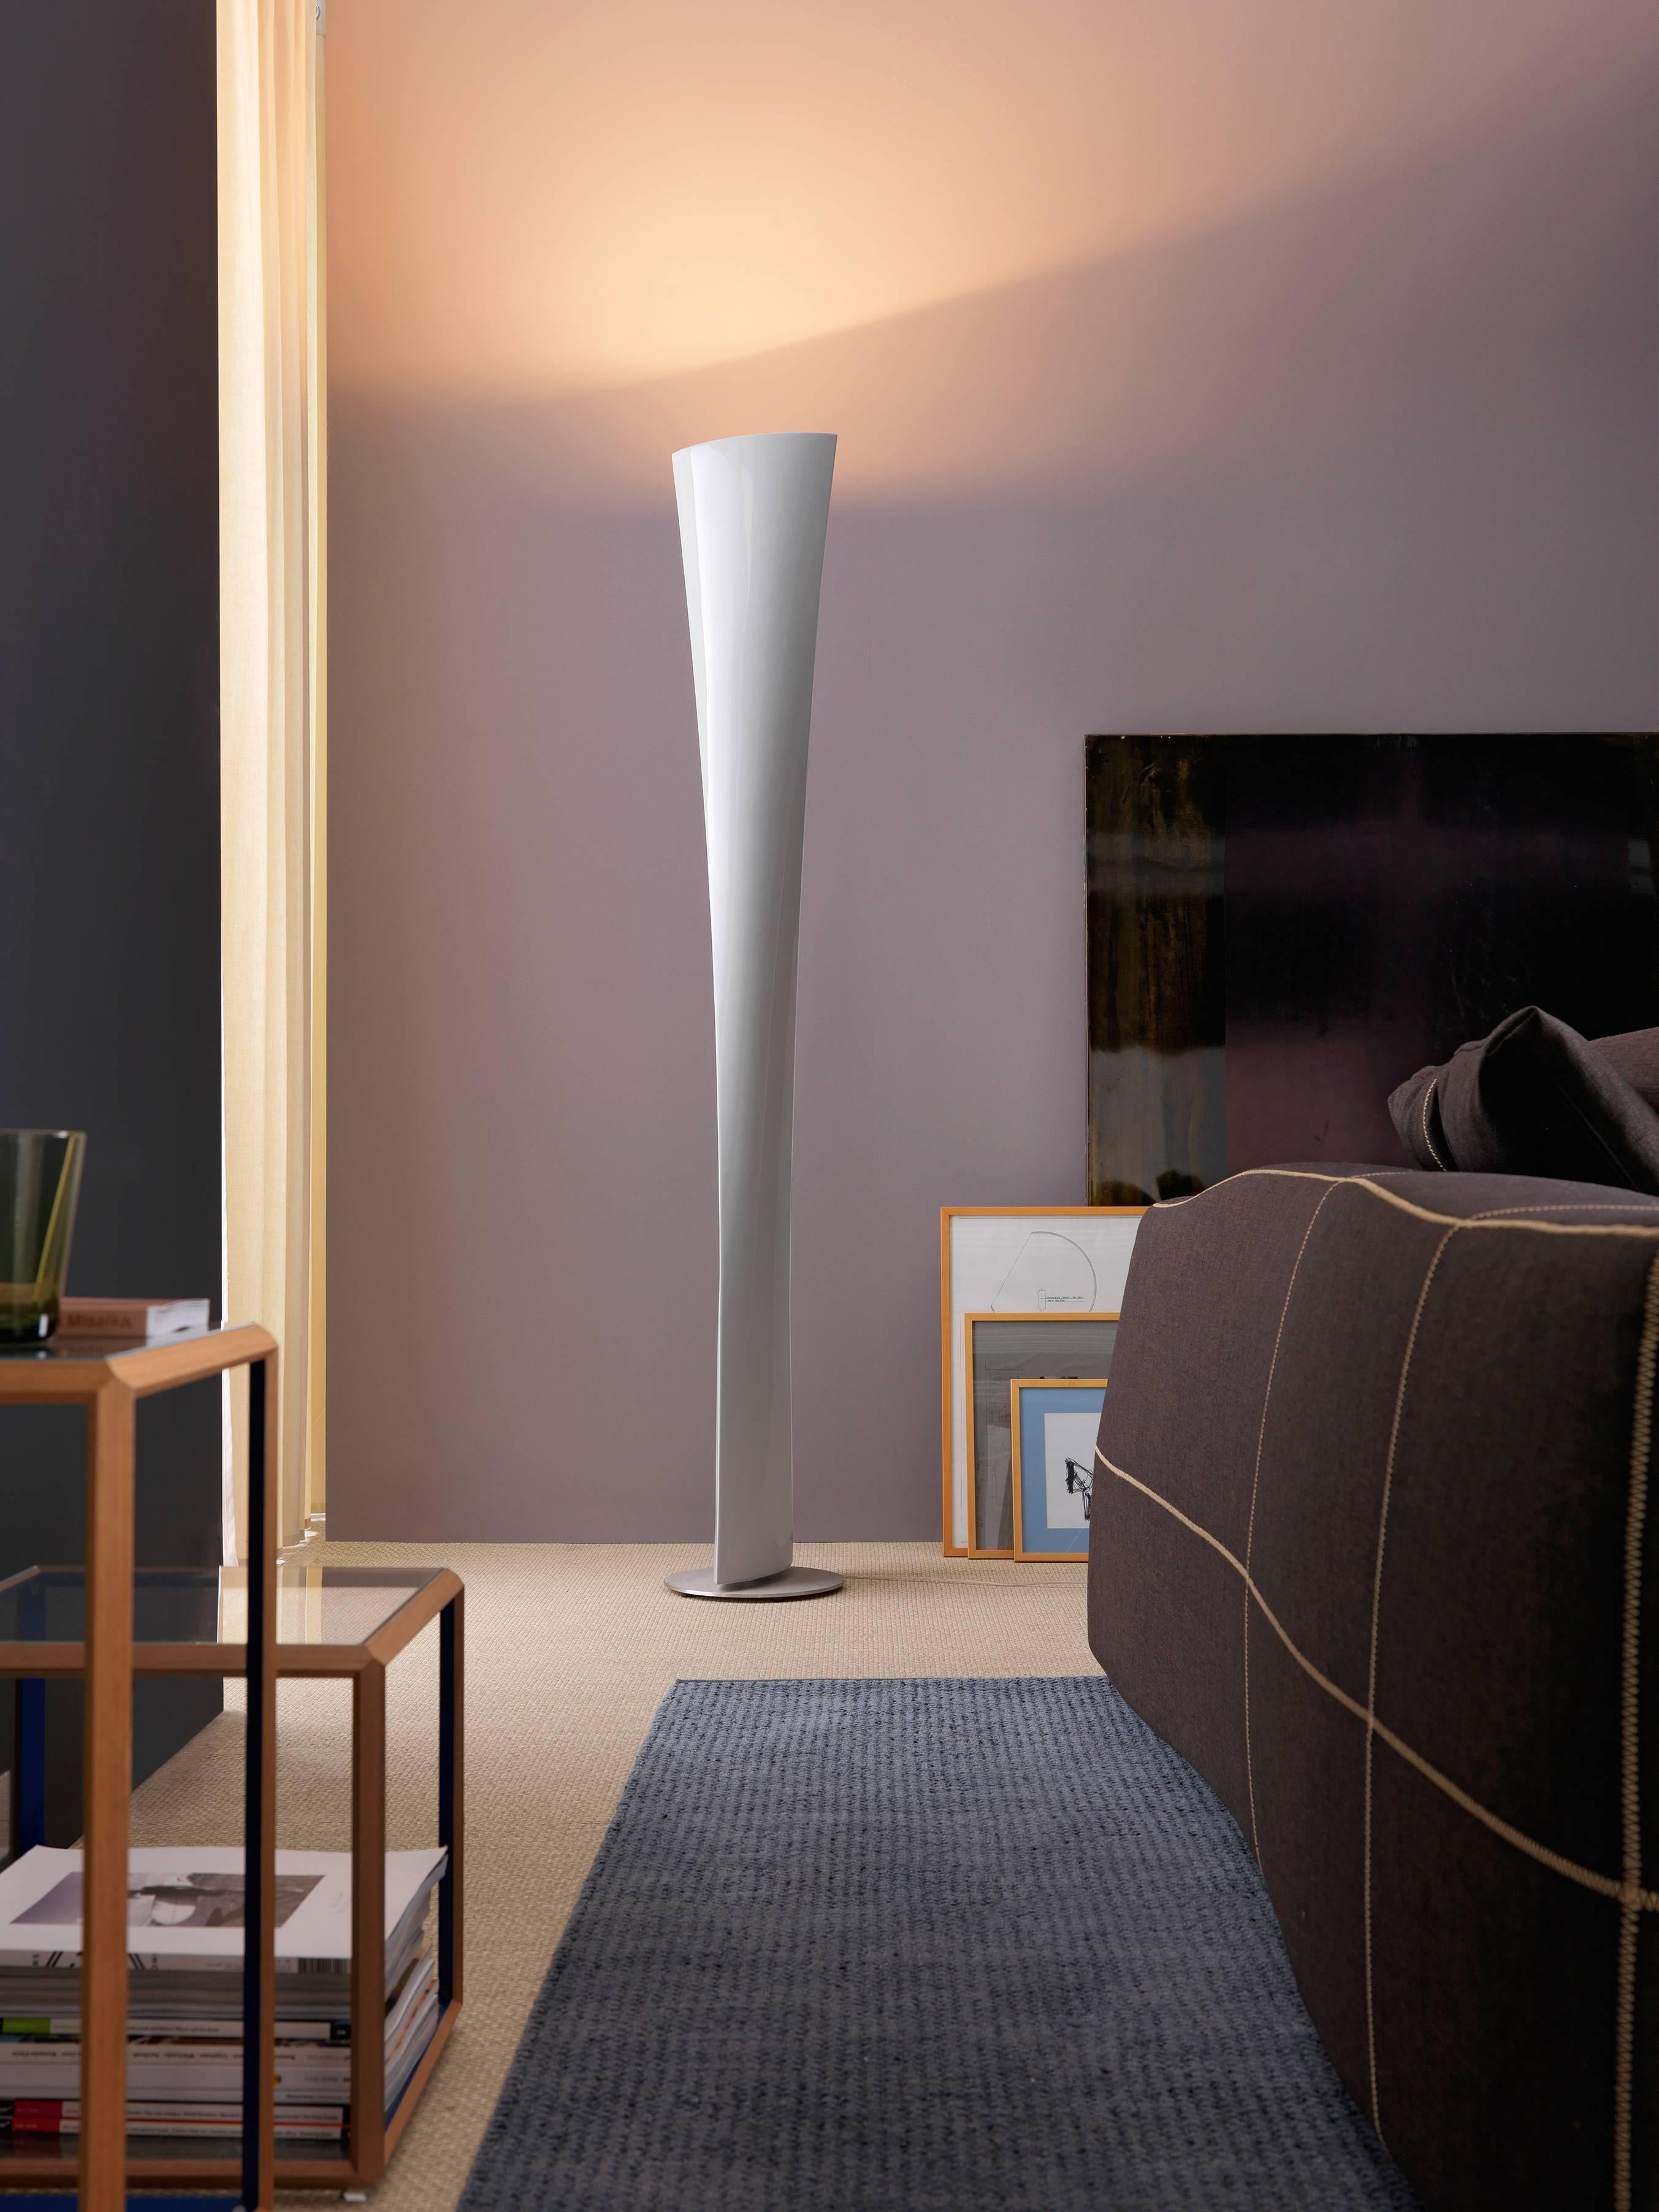 Designed by Marco Acerbis for Fontana Arte in 2007, the Polaris floor lamp has a unique design, made possible thanks to an innovative rotational molding process used in the aeronautics sector. Depending on the viewpoint, the body transforms and